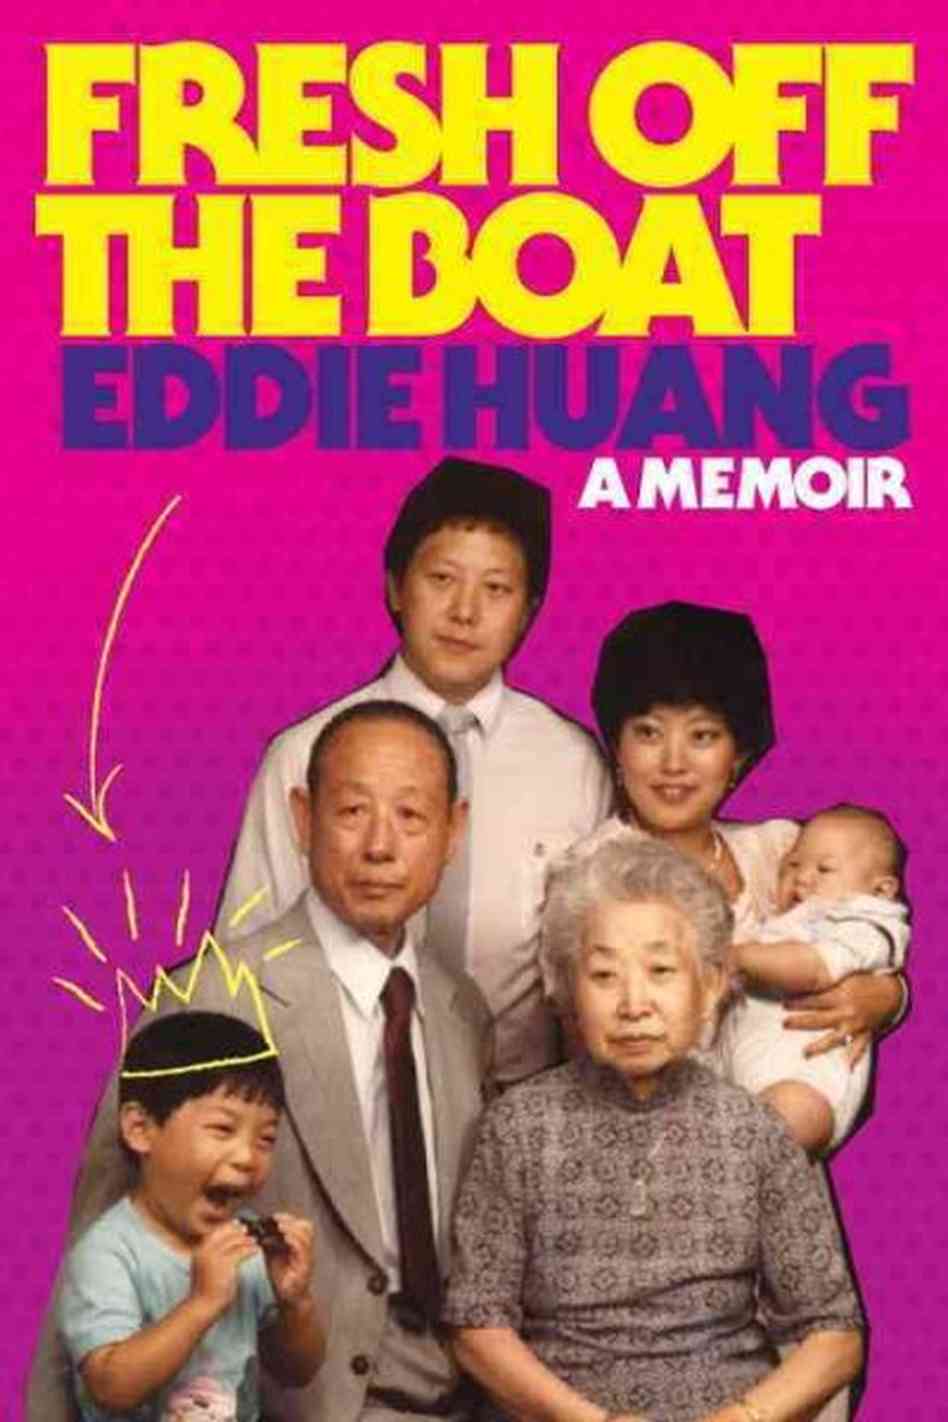 Fresh-Of-The-Boat-Memoirs-Cover